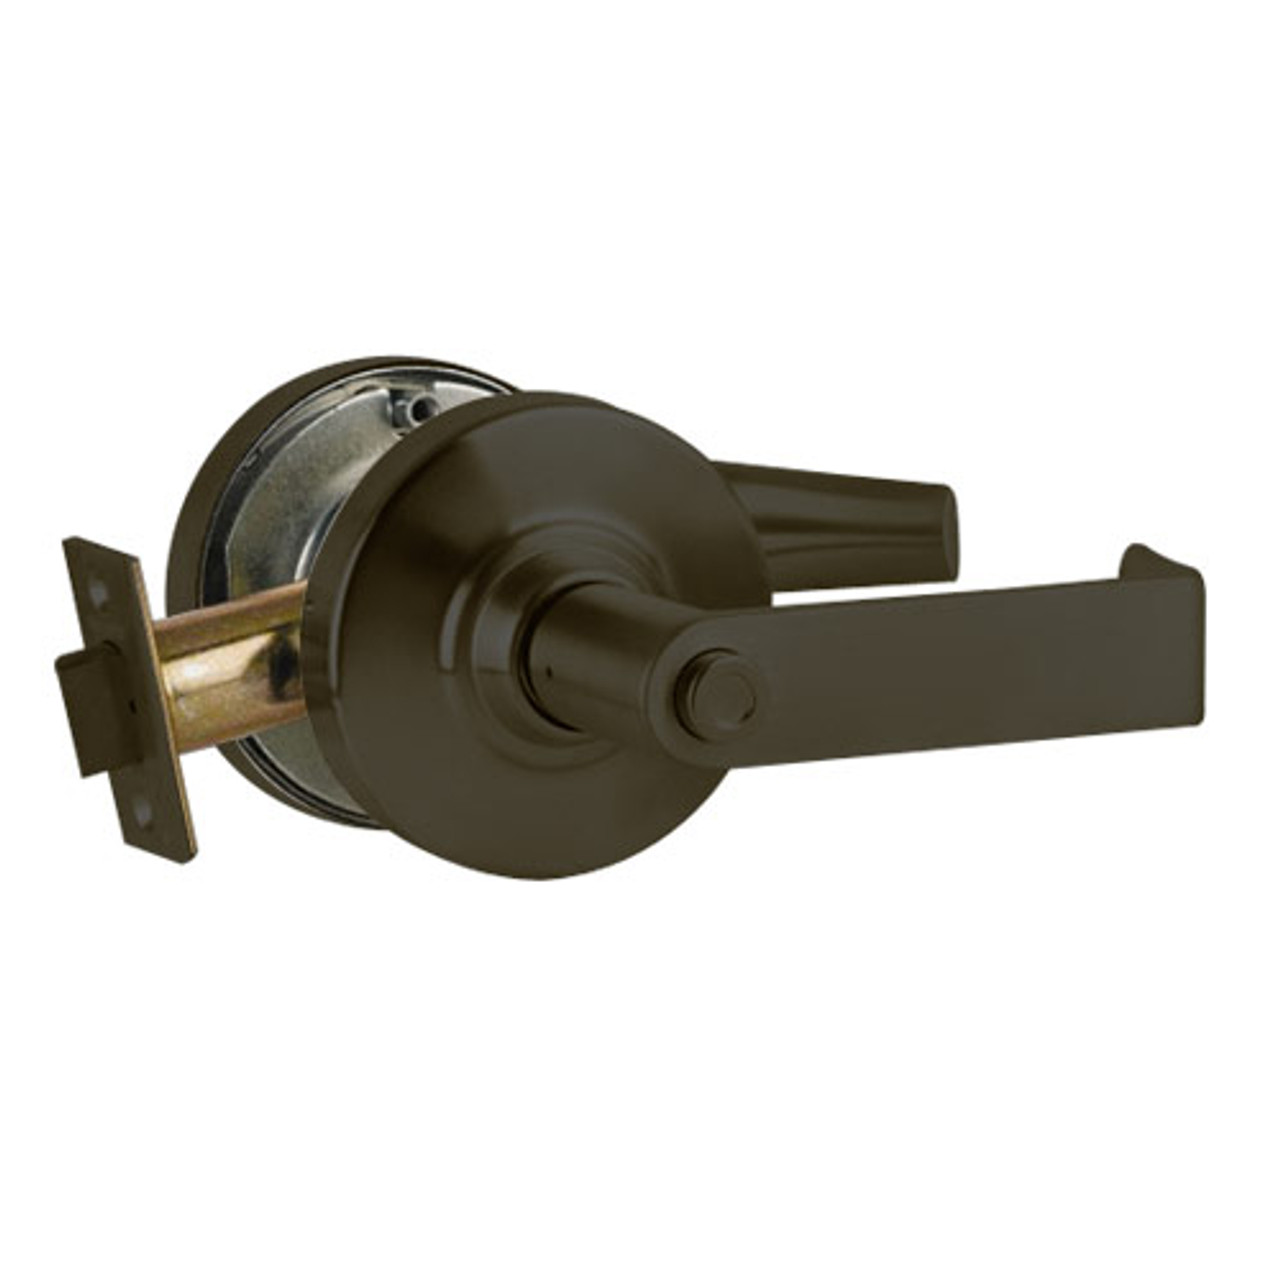 ND44S-RHO-613 Schlage Rhodes Cylindrical Lock in Oil Rubbed Bronze